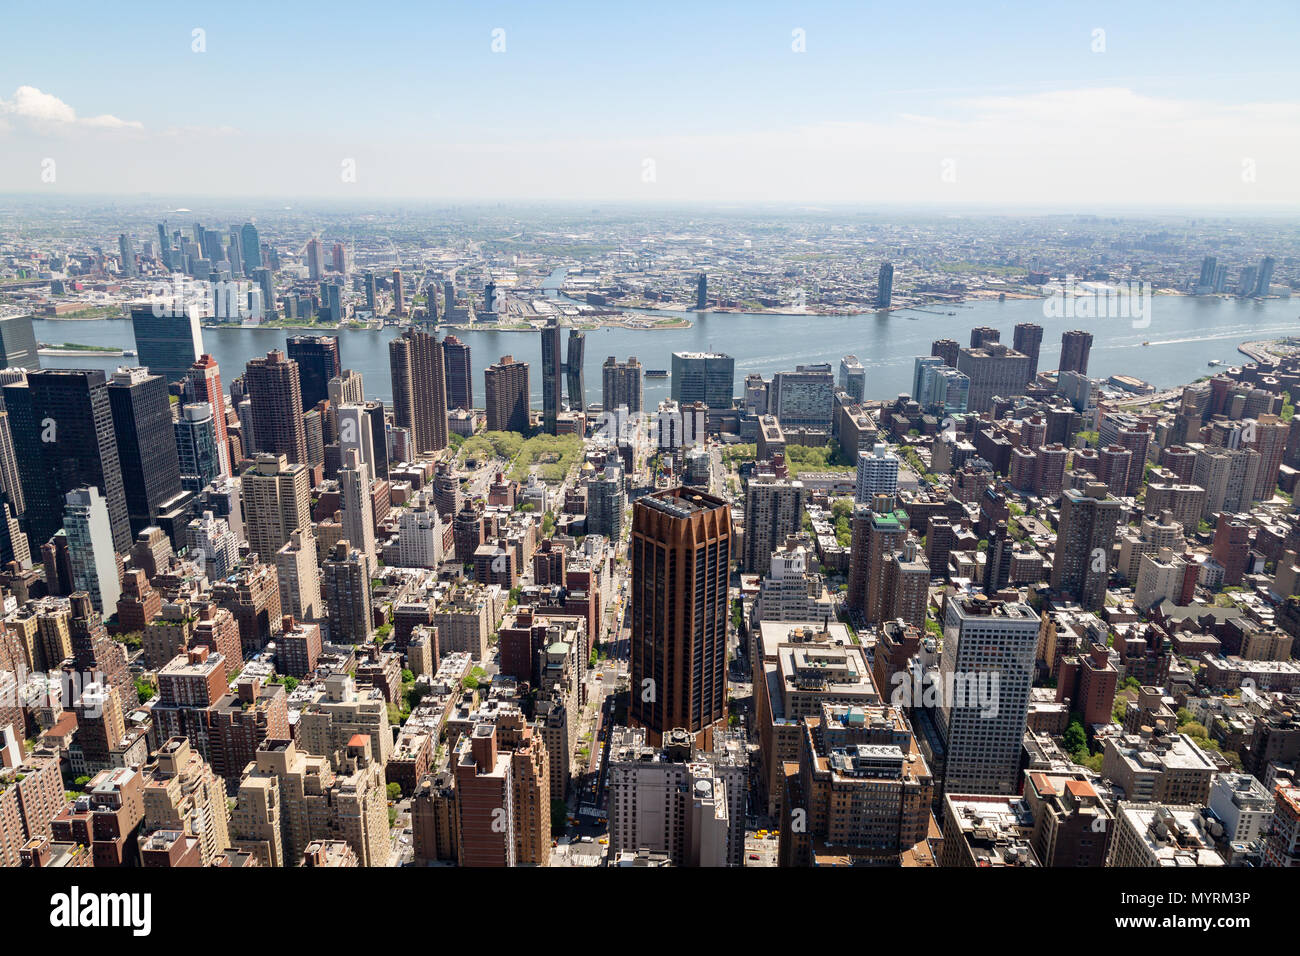 Skyline view of Midtown New York from the Empire State Building looking East towards East River and Brooklyn, New York city USA Stock Photo